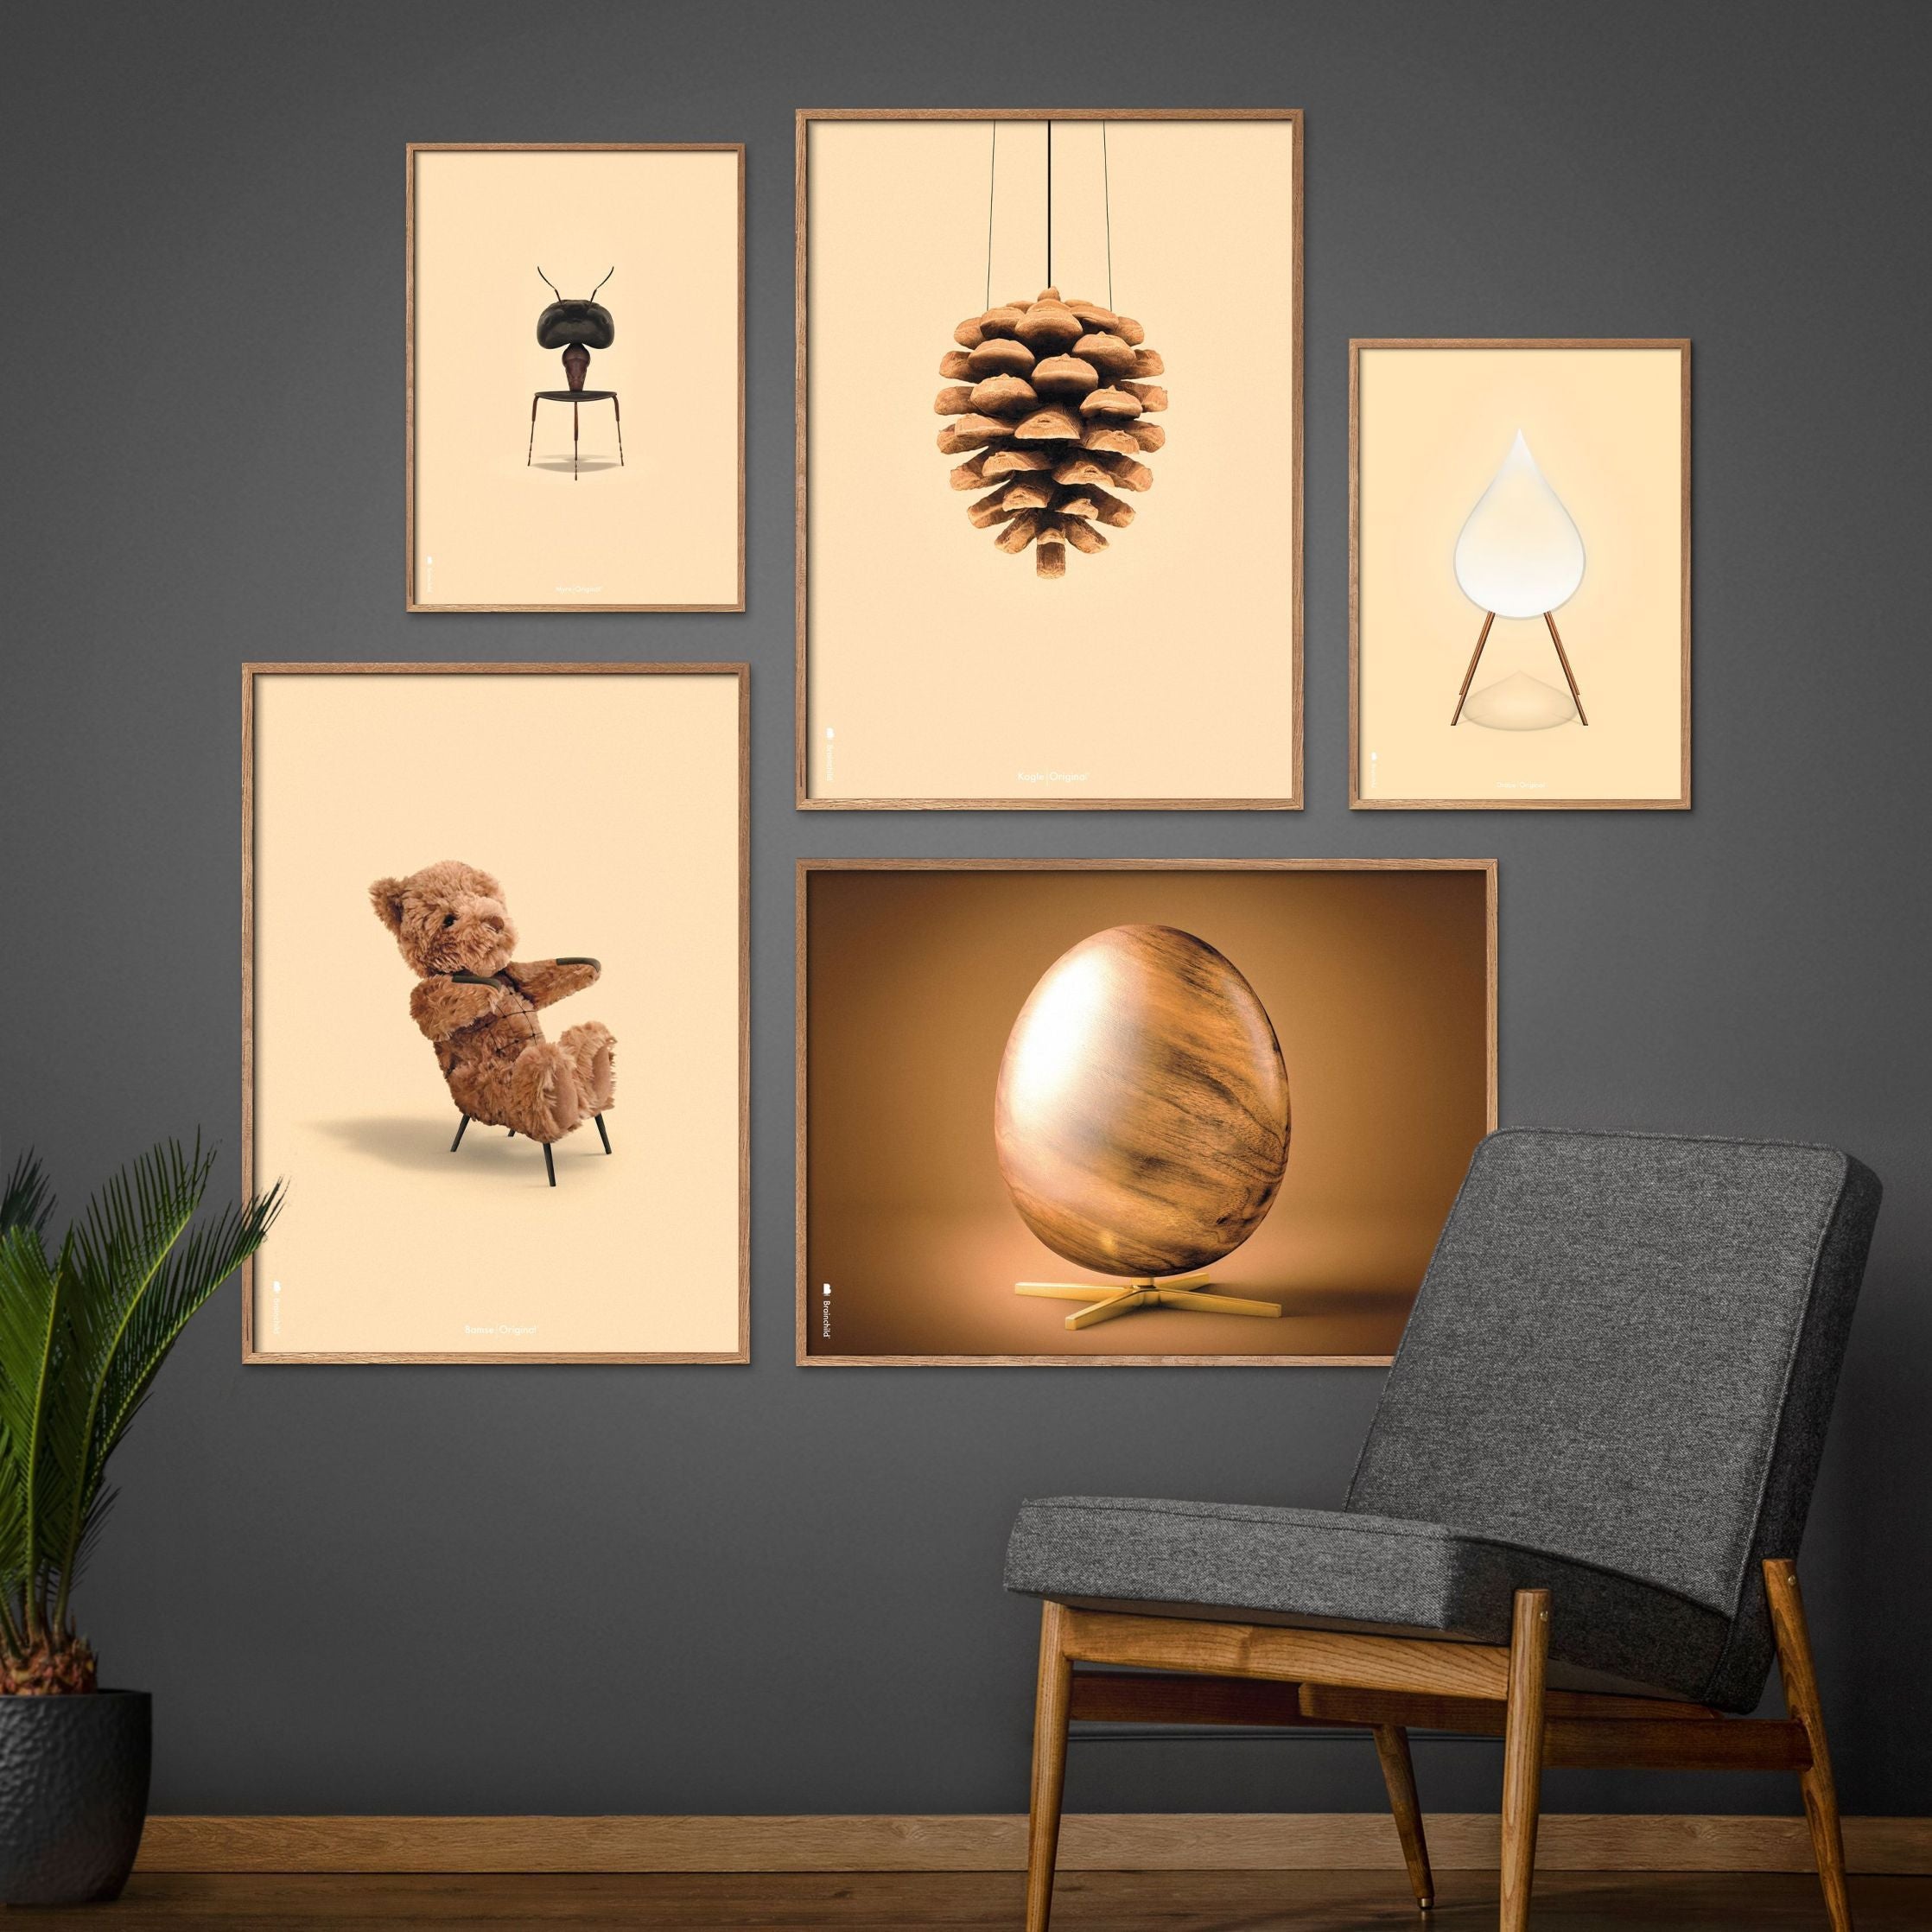 Brainchild Teddy Bear Classic Poster, Frame Made Of Light Wood 30x40 Cm, Sand Colored Background